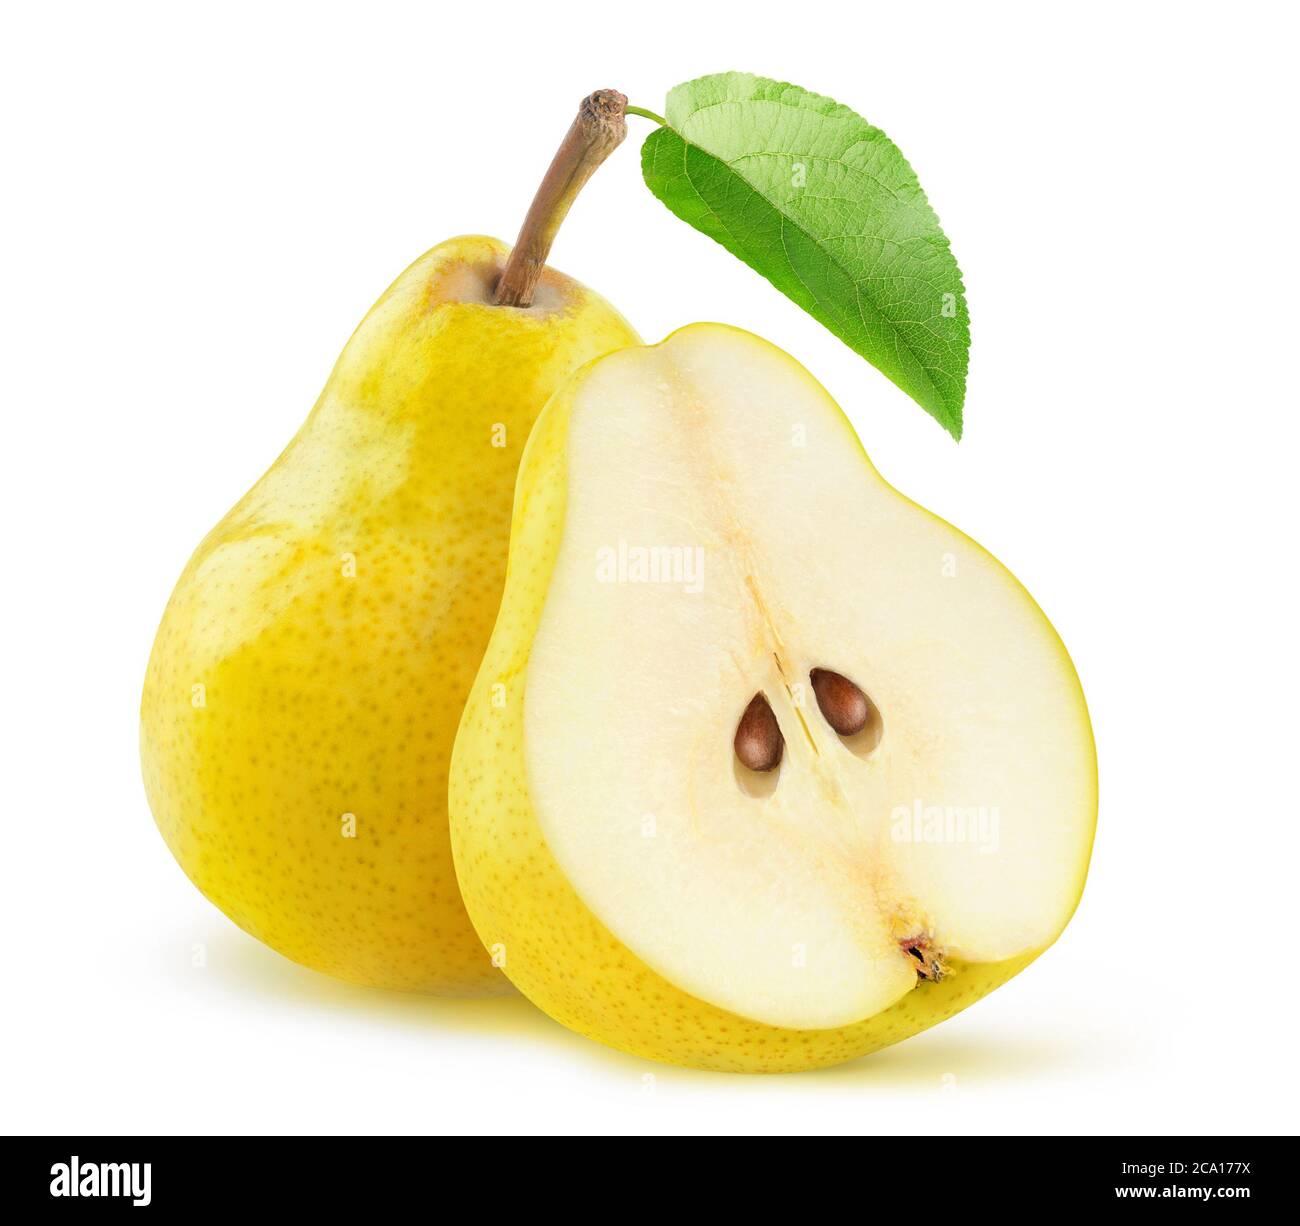 Yellow pears cut in half isolated on white background Stock Photo